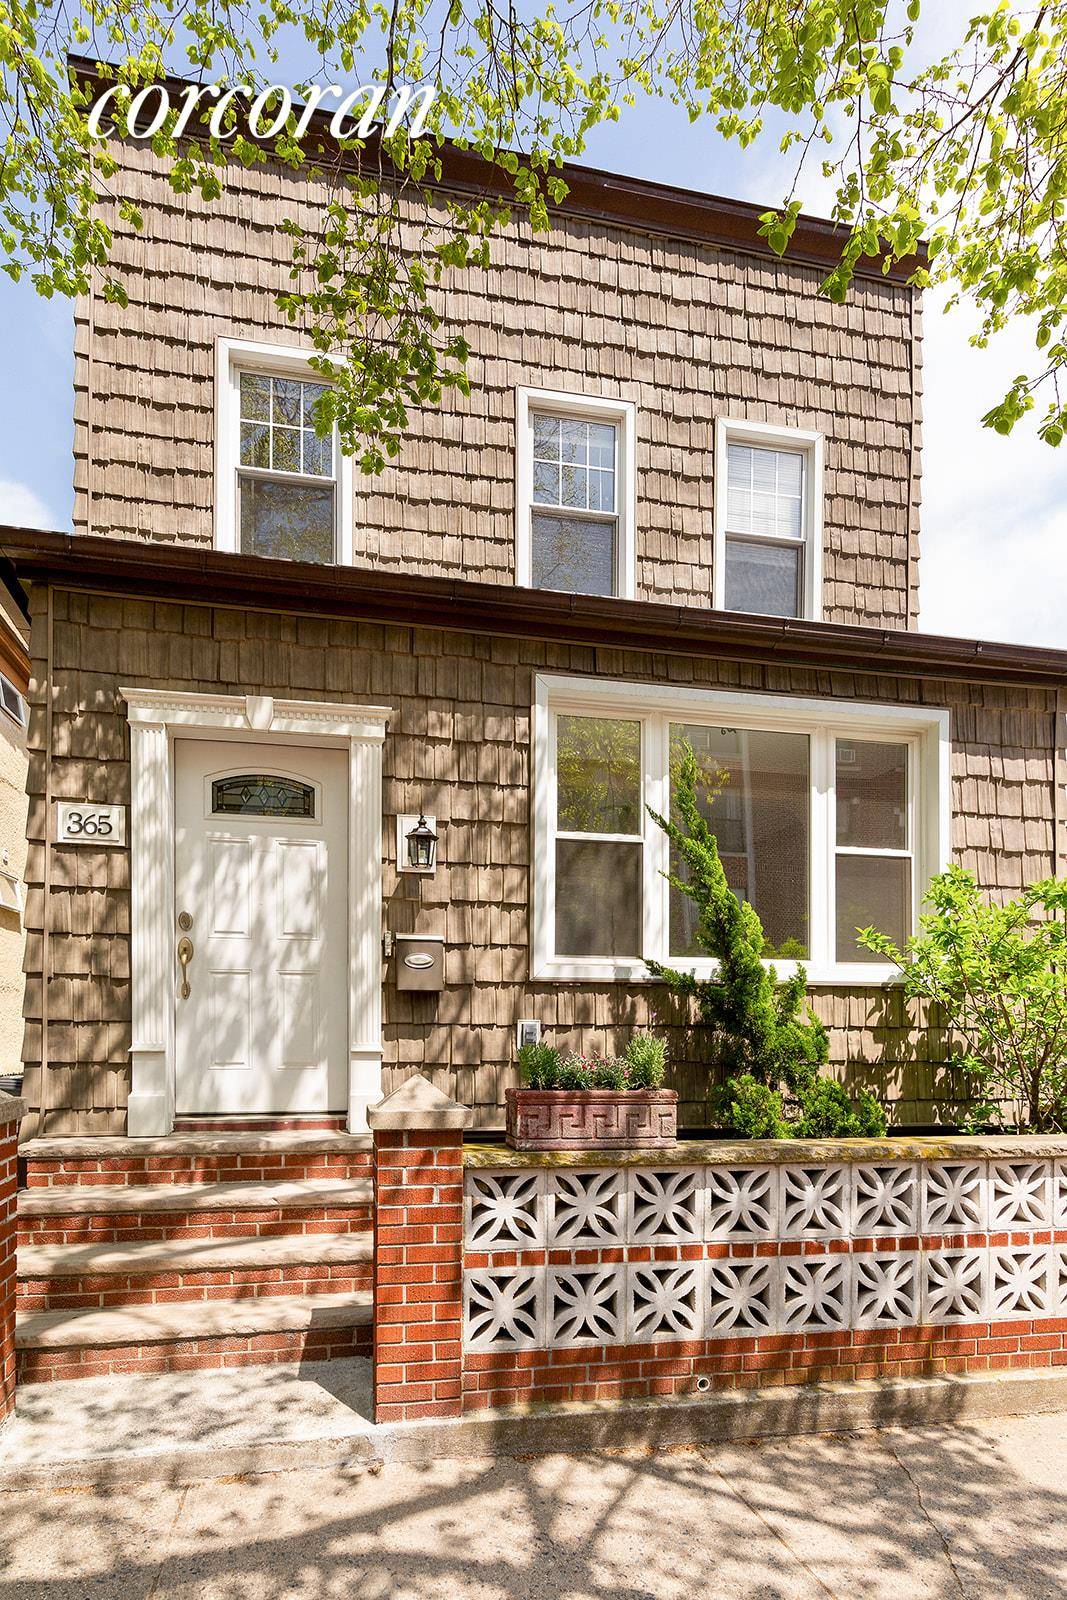 Introducing 365 88th Street a fully detached, 20' wide two family home in Bay Ridge !